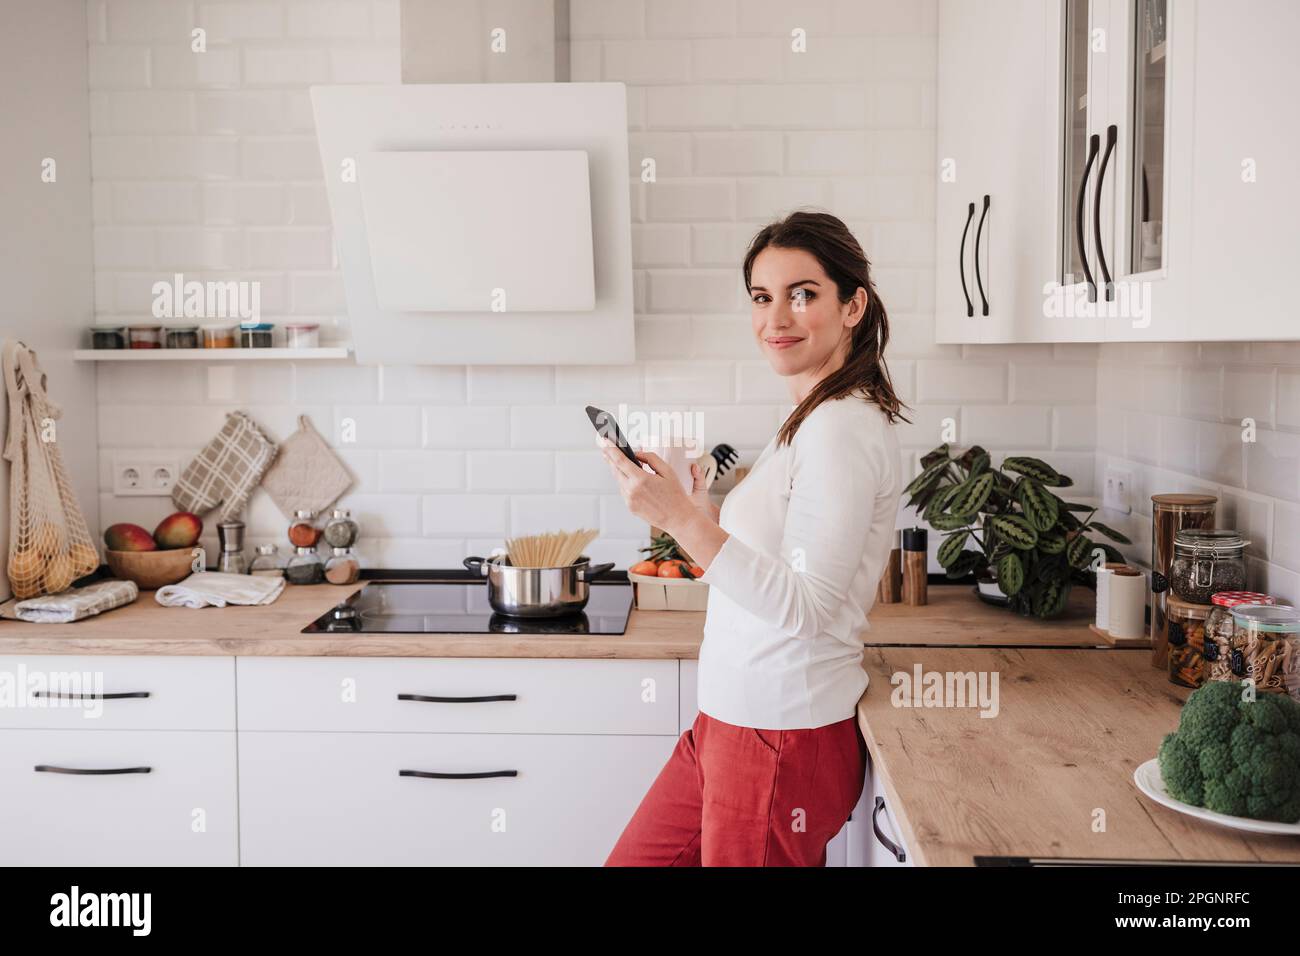 Smiling woman with mobile phone standing by counter in kitchen Stock Photo